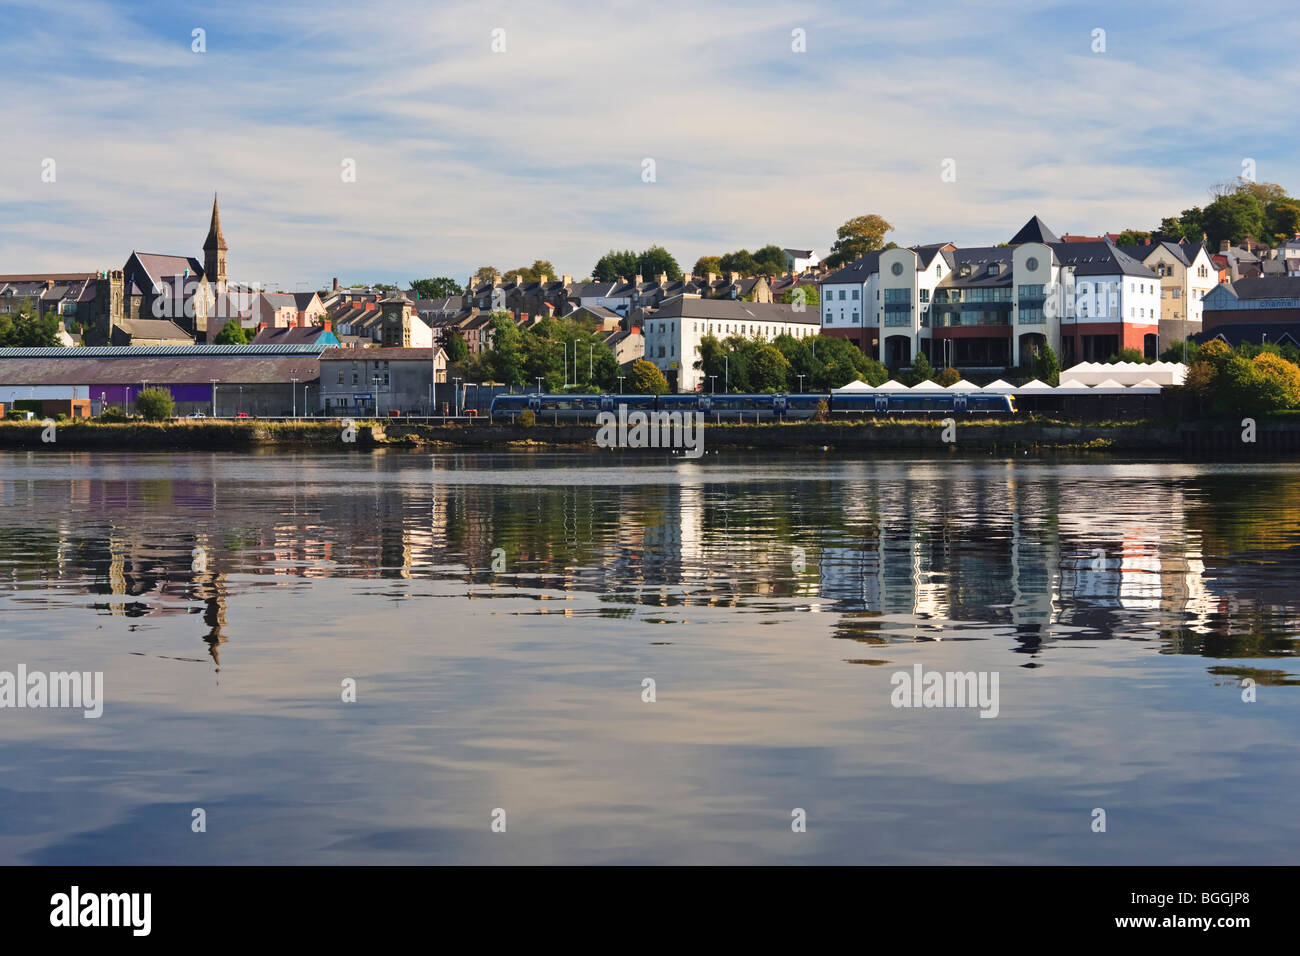 Looking east across the River Foyle to Waterside Link in Londonderry, Count Londonderry, Northern Ireland Stock Photo